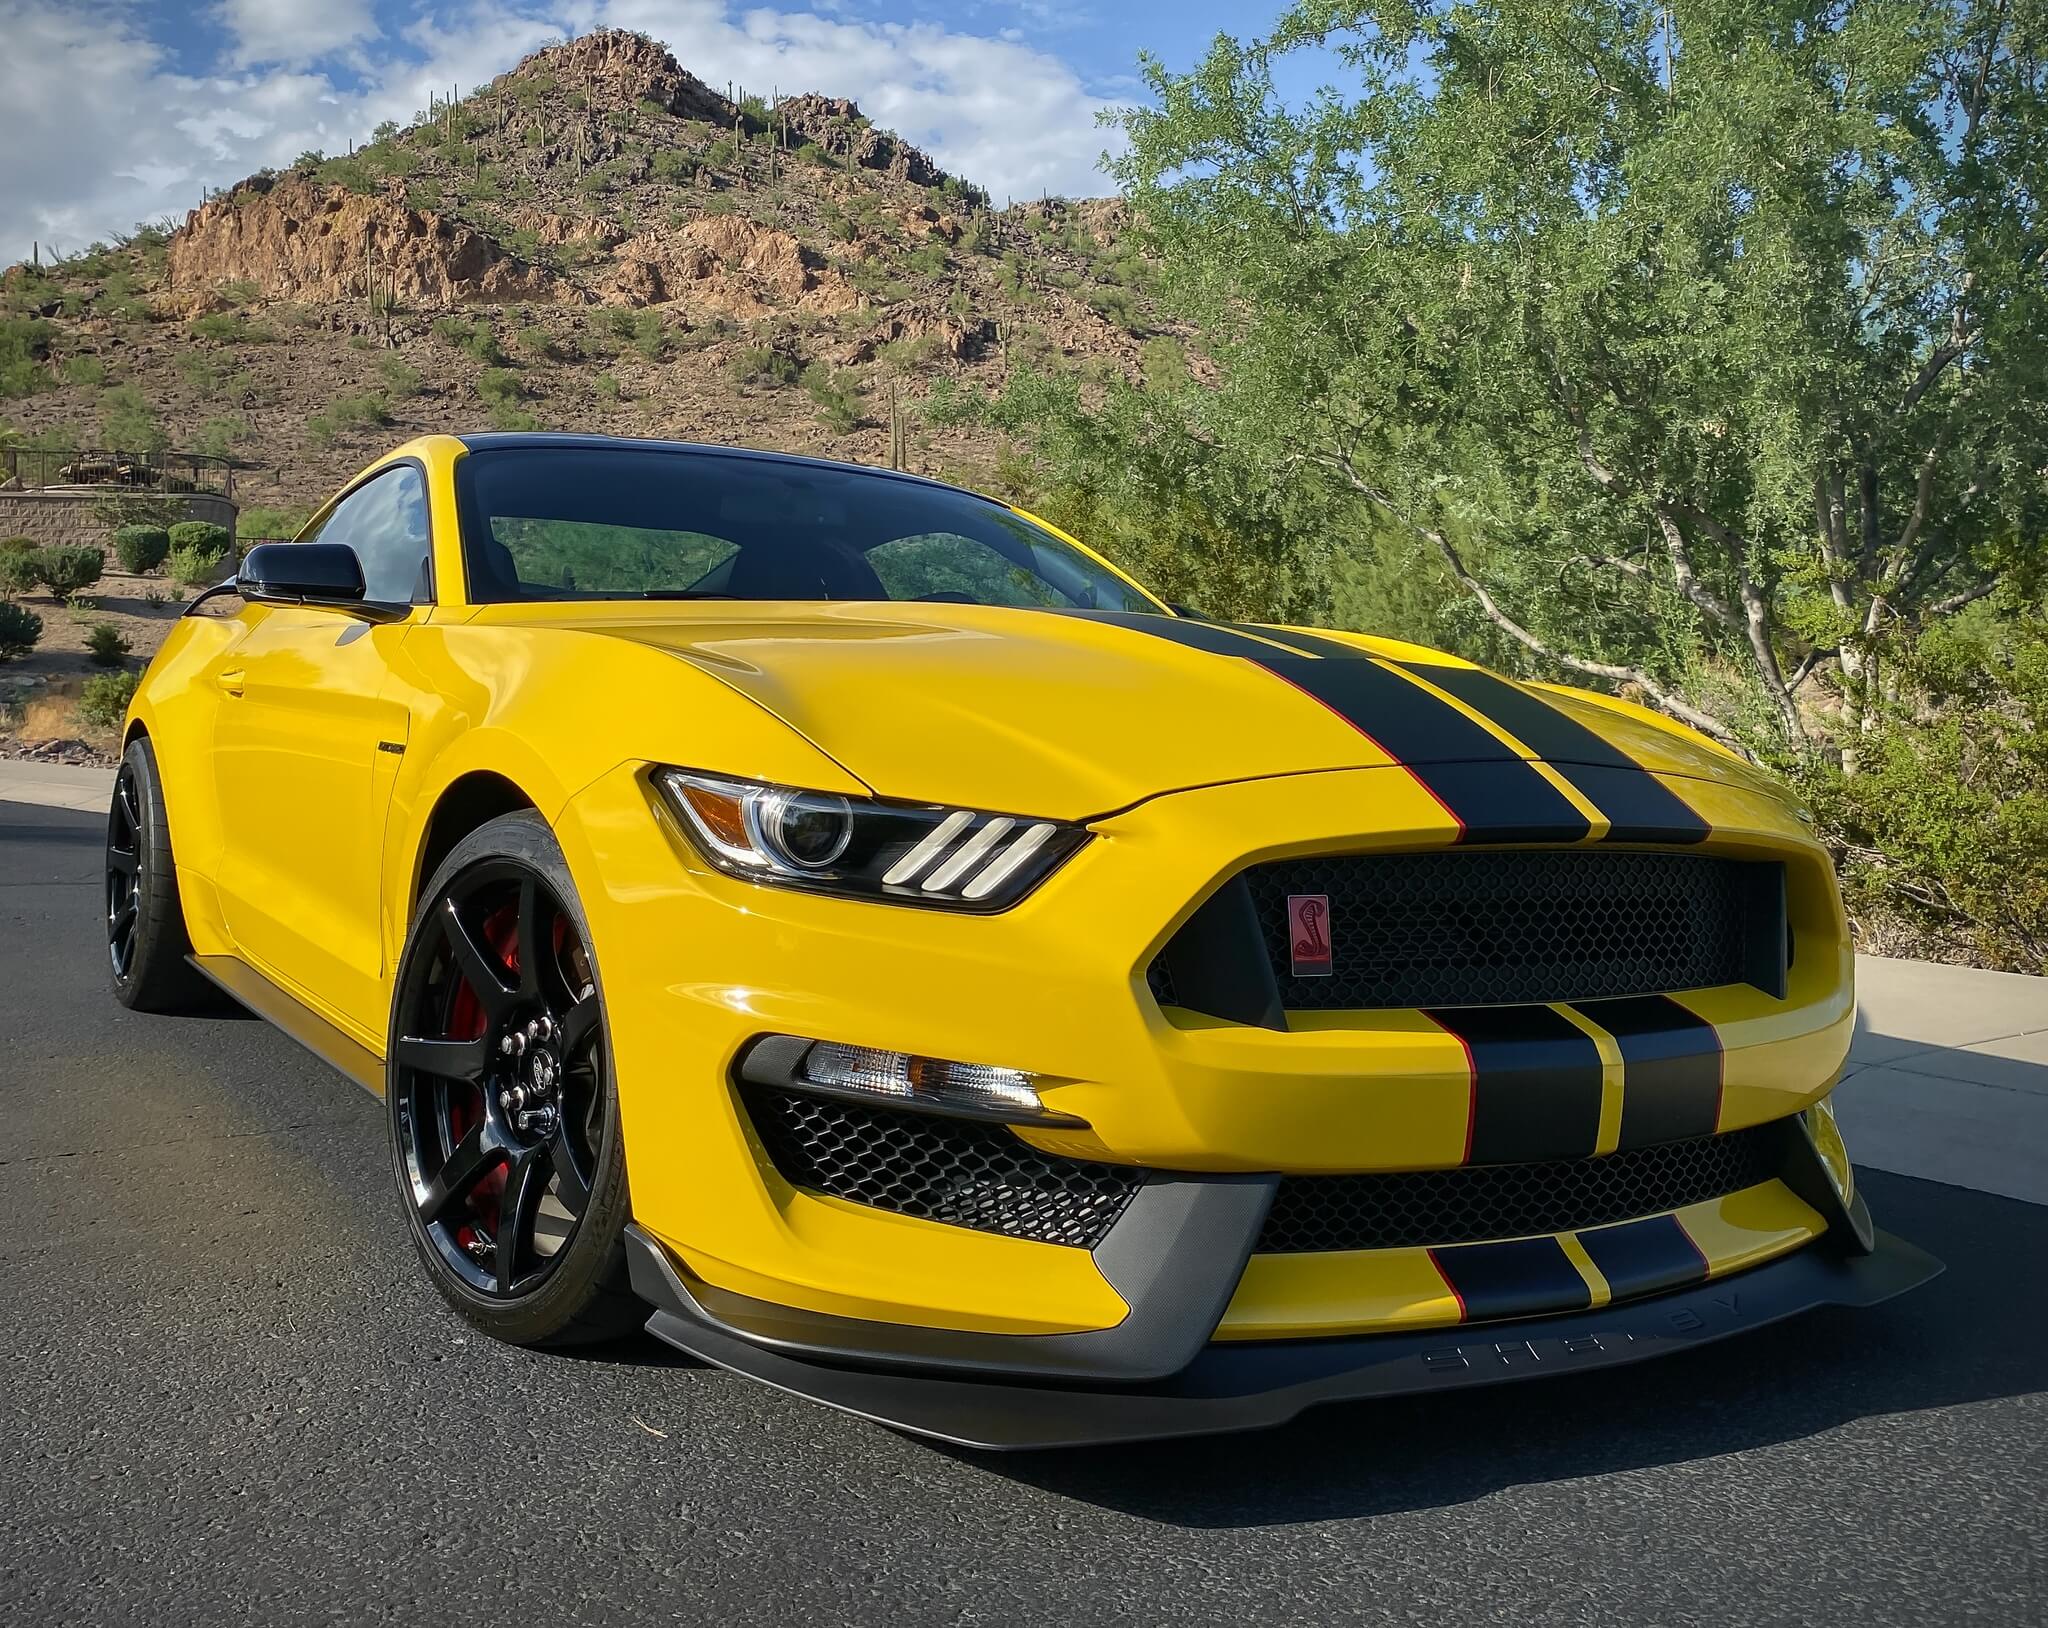 200-Mile 2018 Ford Mustang Shelby GT350R | PCARMARKET